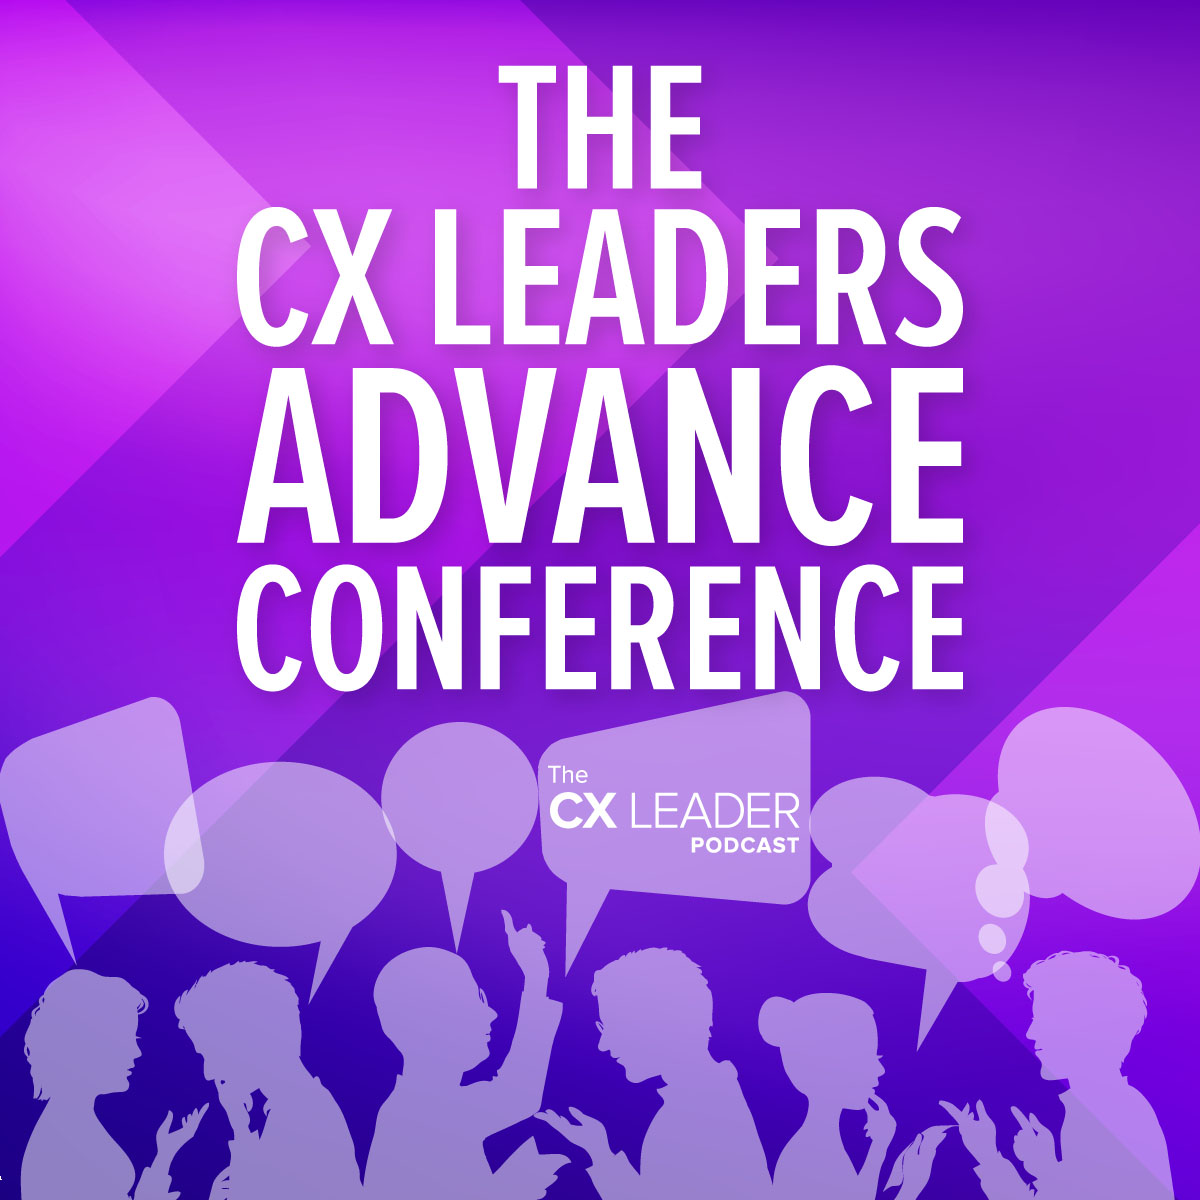 The CX Leaders Advance Conference